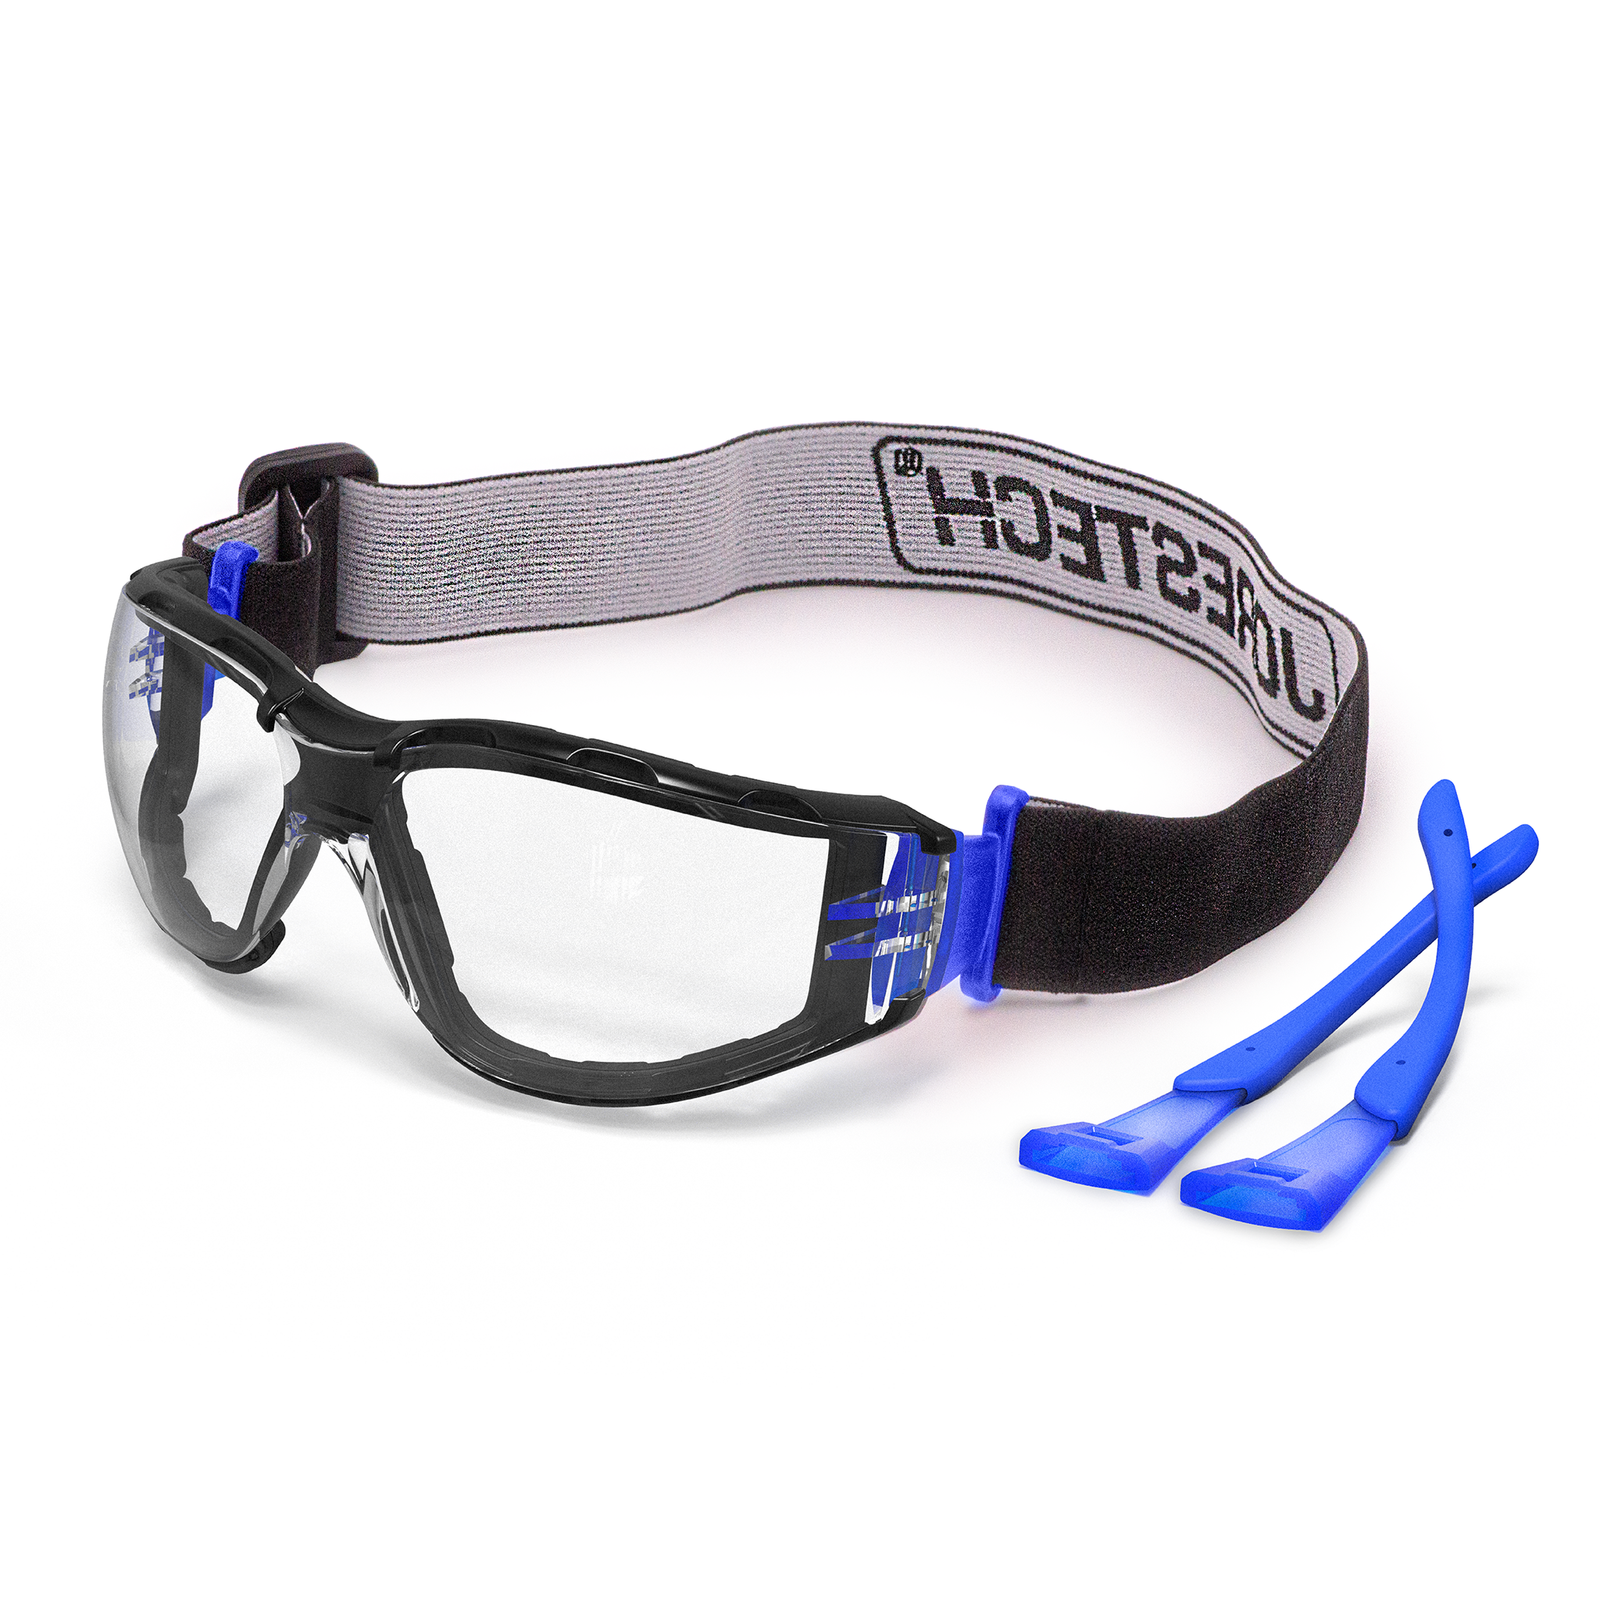 Diagonal view of the Anti fog JORESTECH ANSI compliant safety glasses convertible to goggles with removable foam seal gasket, temples and headband. Glaases have the elastic strap installed and the blue temples are on the right side